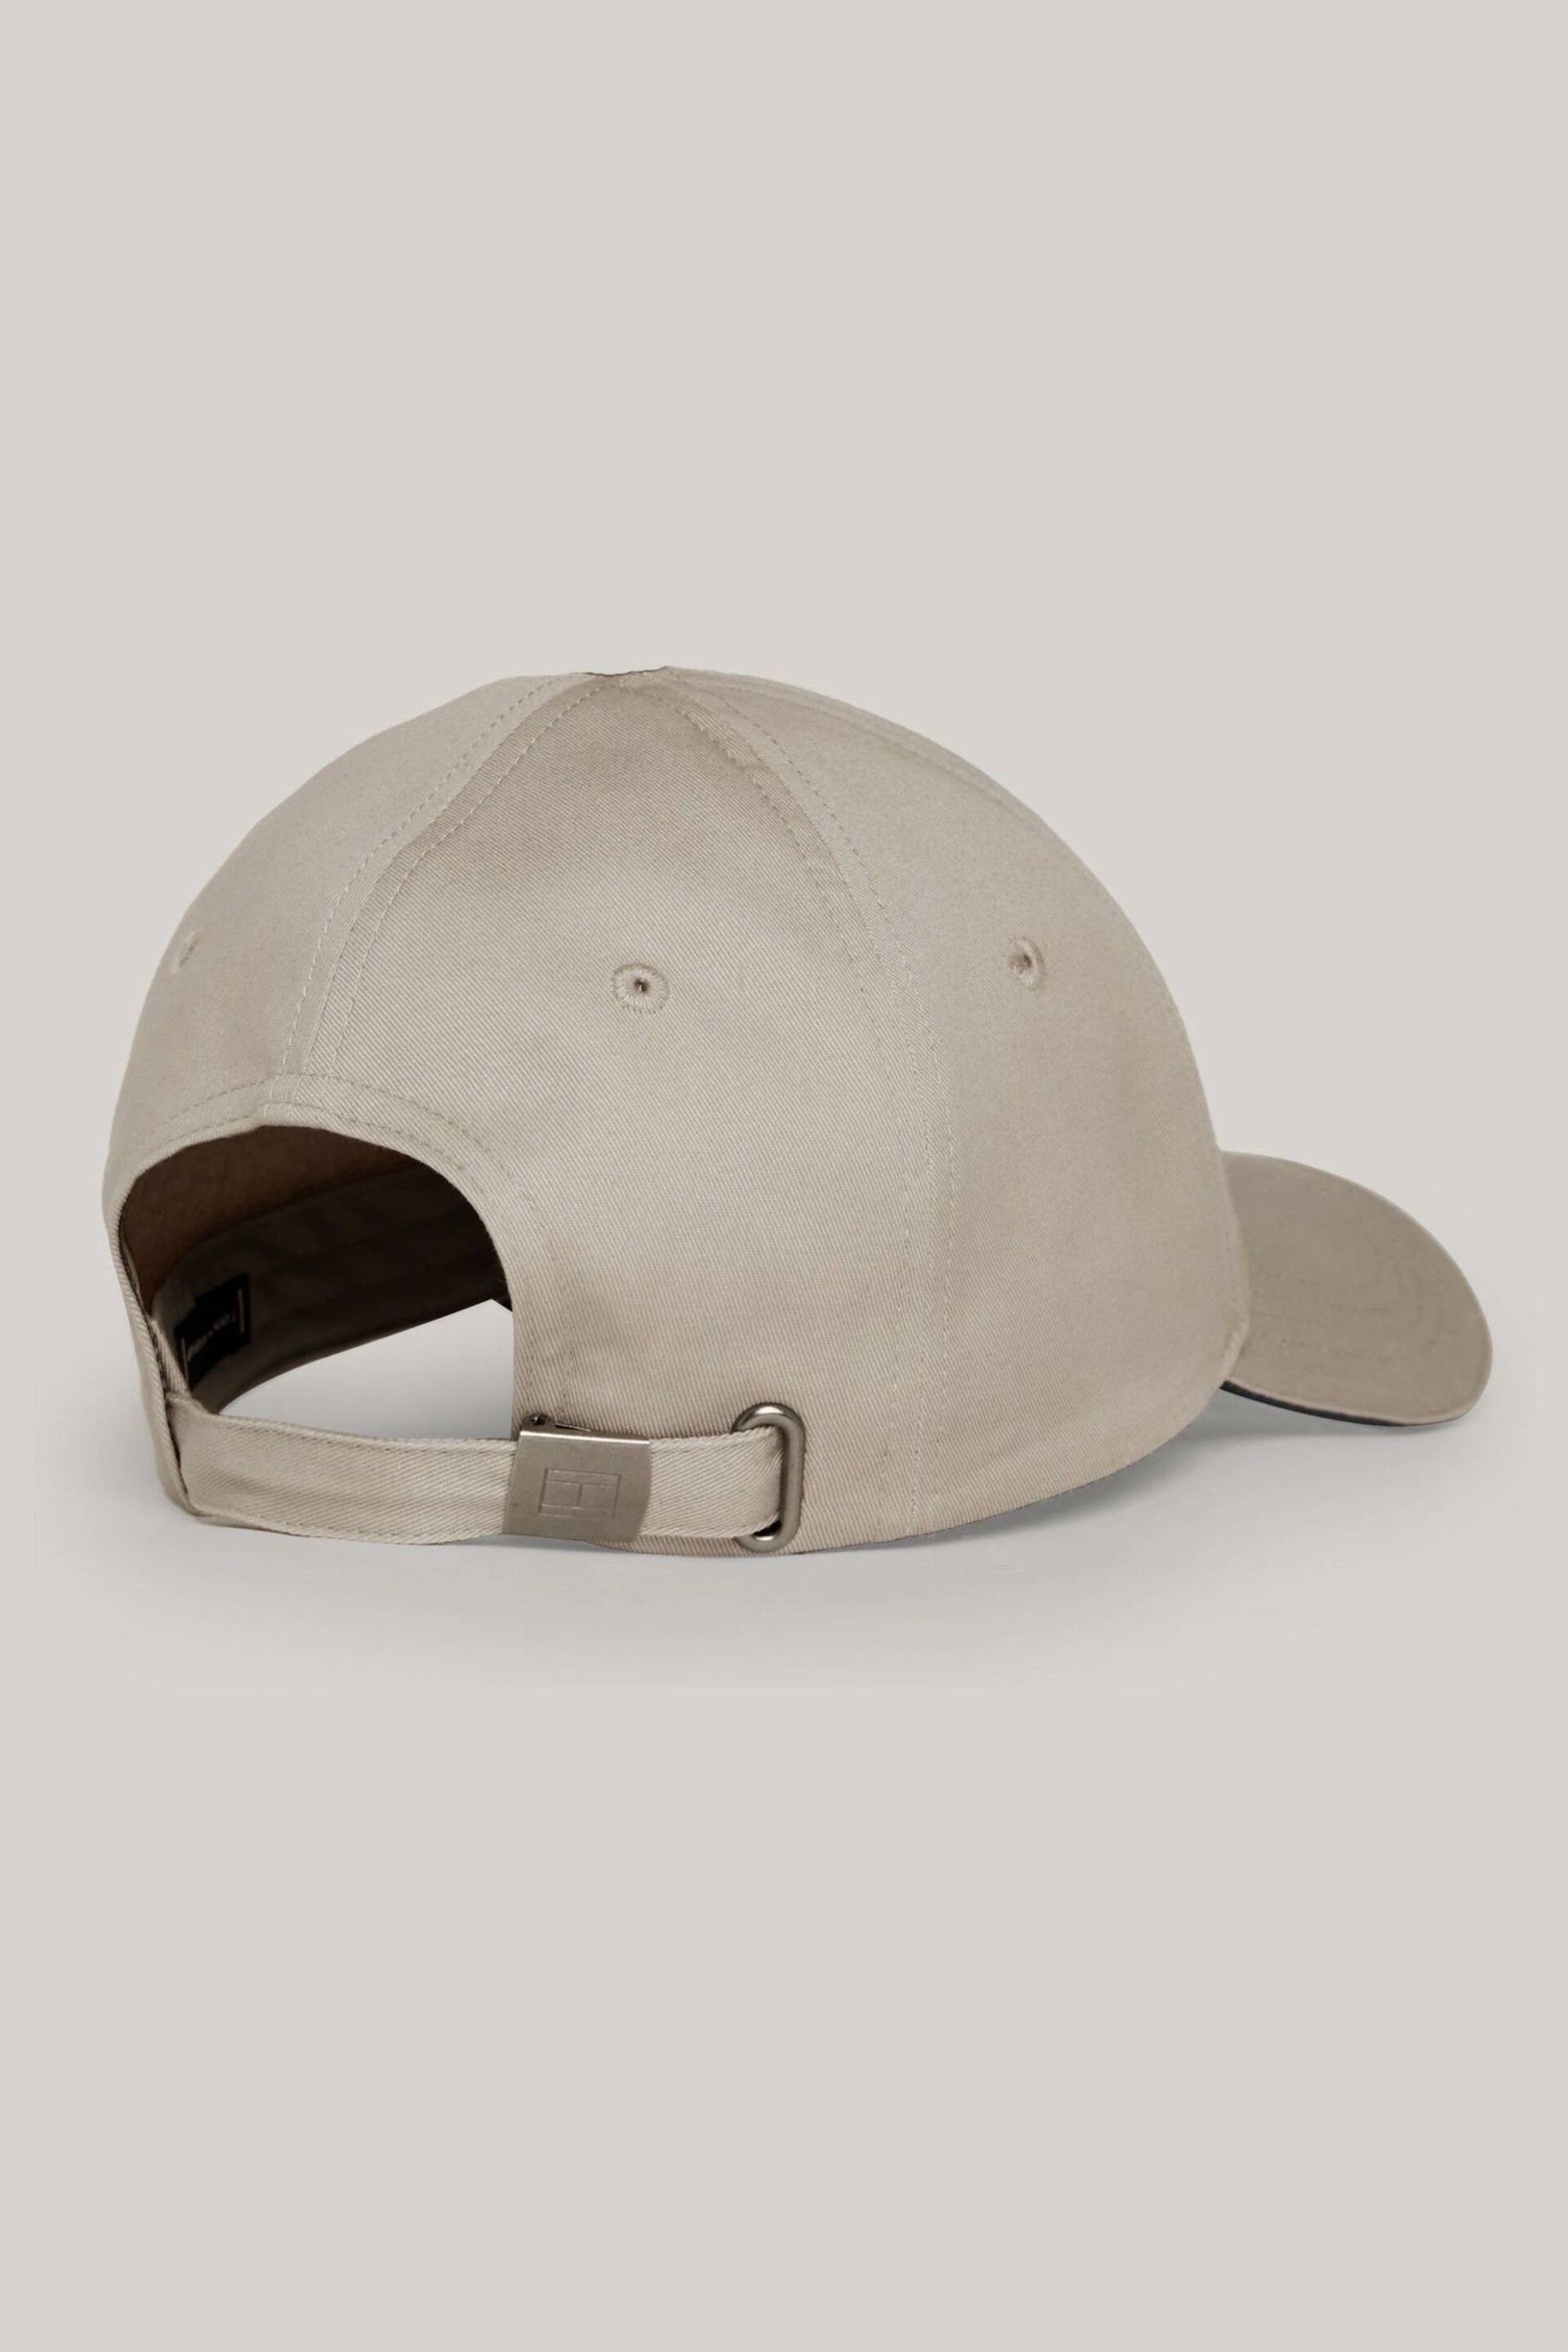 Tommy Hilfiger Cream Corporate Cap - Image 2 of 3